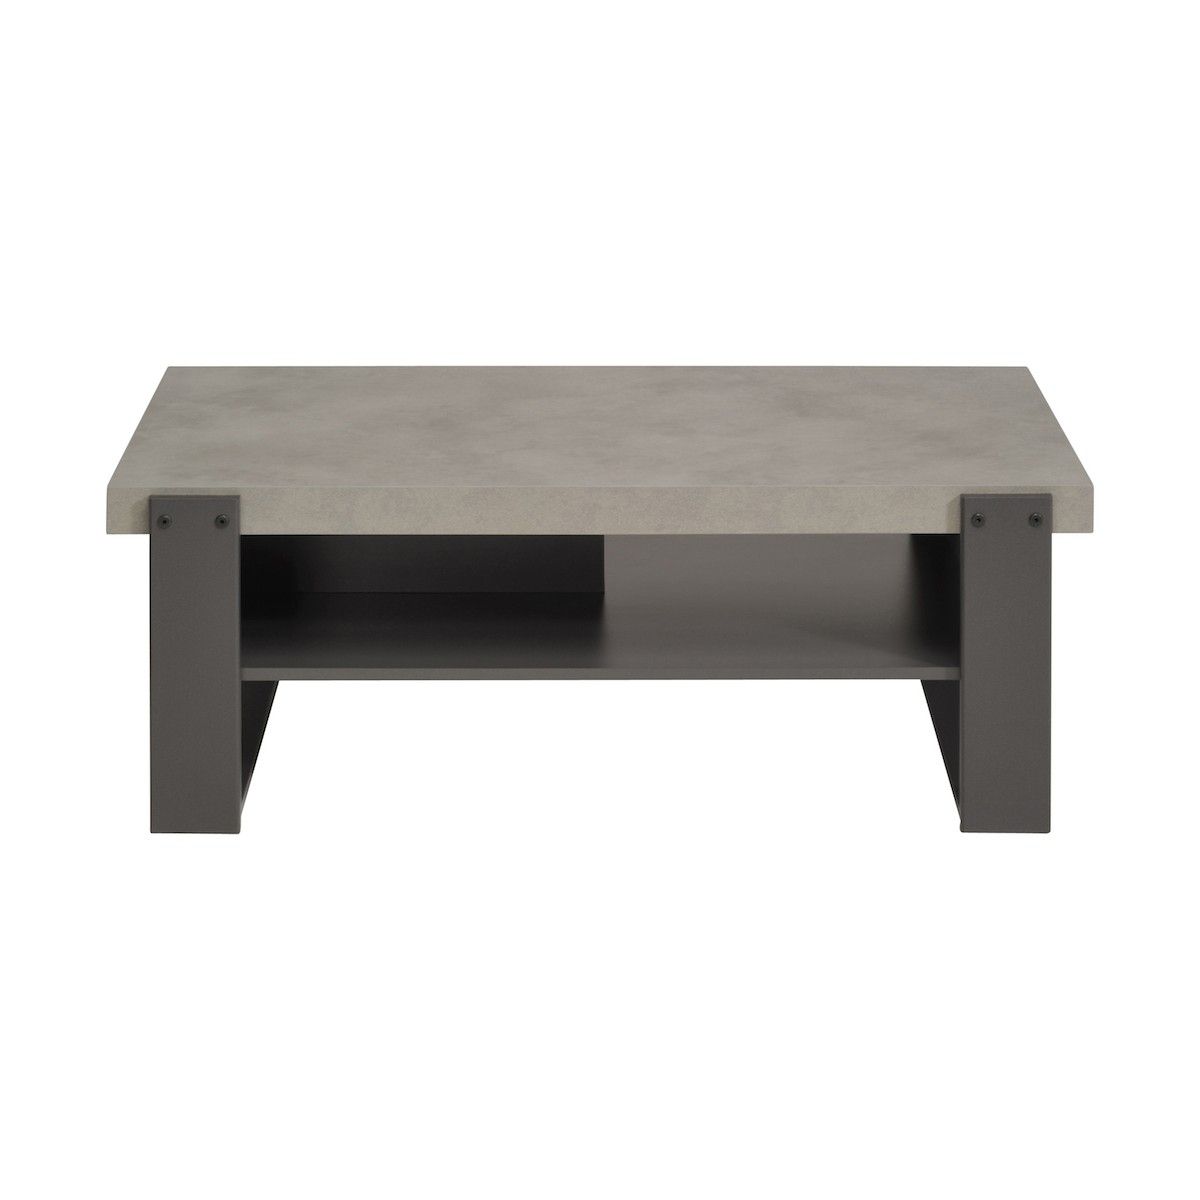 Low Industrial Eleanor Wooden Table (clear, Gray Shade Concrete) – Amp  Story 5843 Pertaining To Industrial Faux Wood Coffee Tables (View 5 of 15)